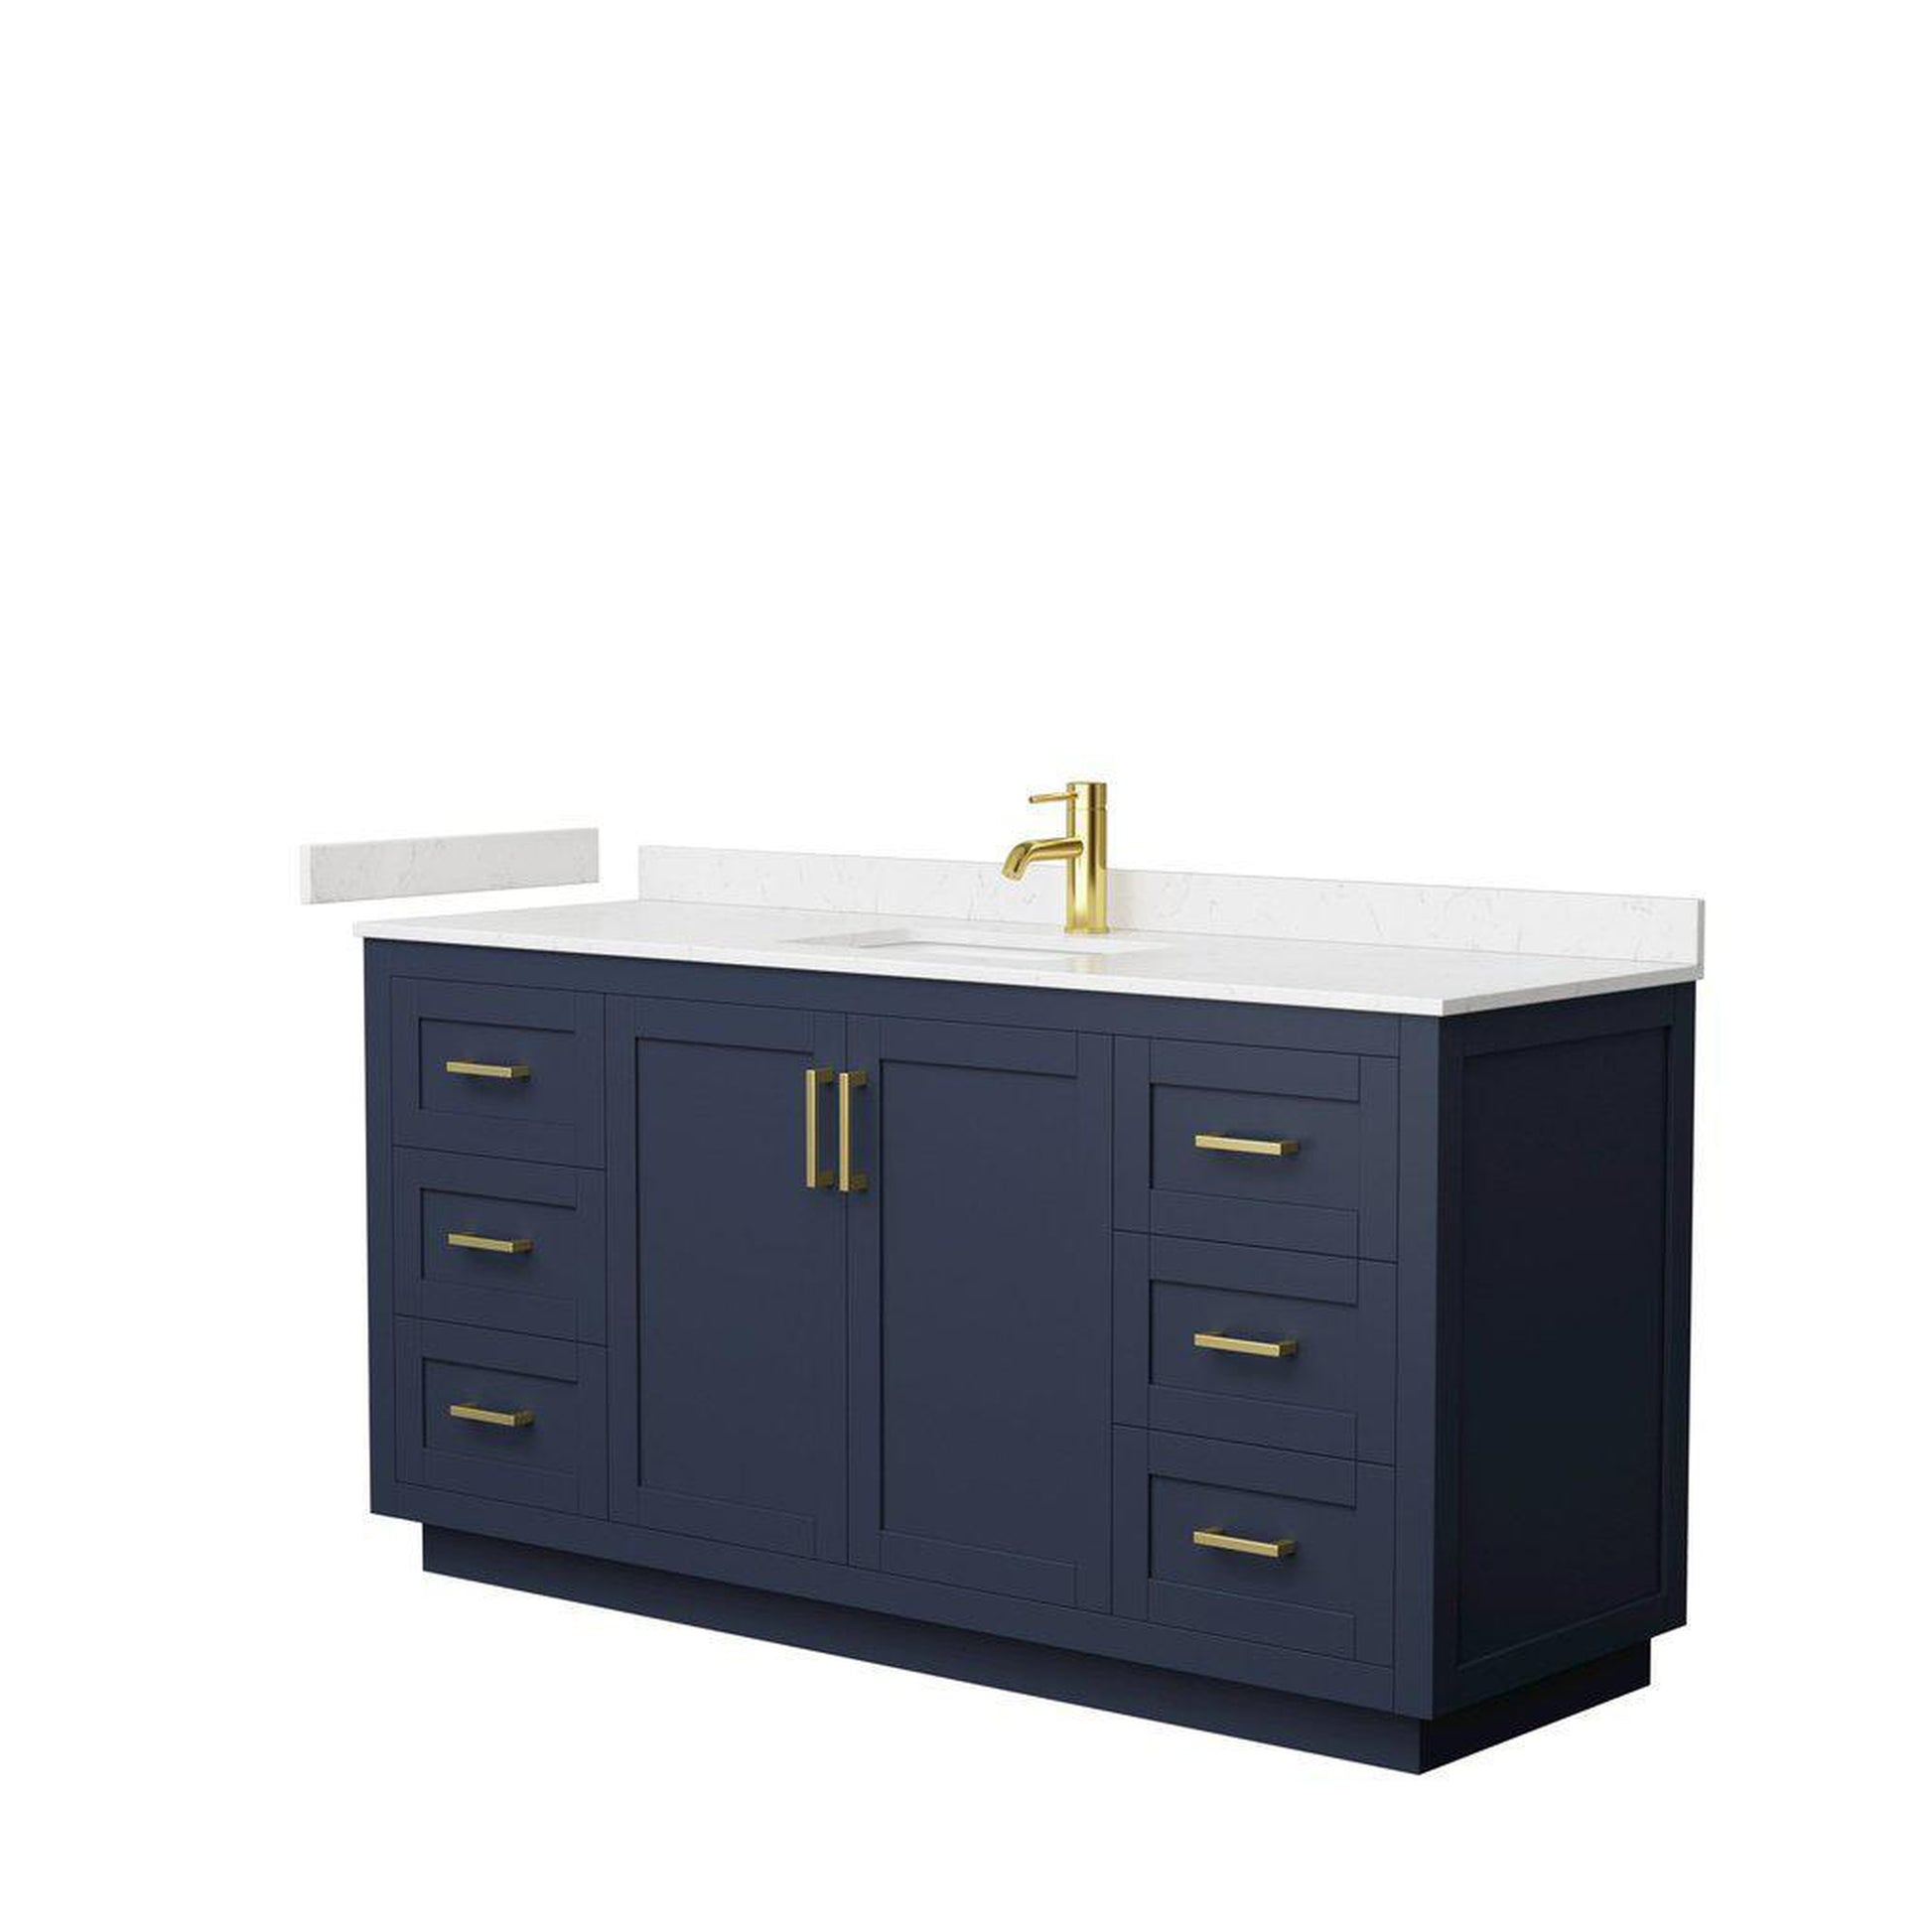 Wyndham Collection Miranda 66" Single Bathroom Dark Blue Vanity Set With Light-Vein Carrara Cultured Marble Countertop, Undermount Square Sink, And Brushed Gold Trim